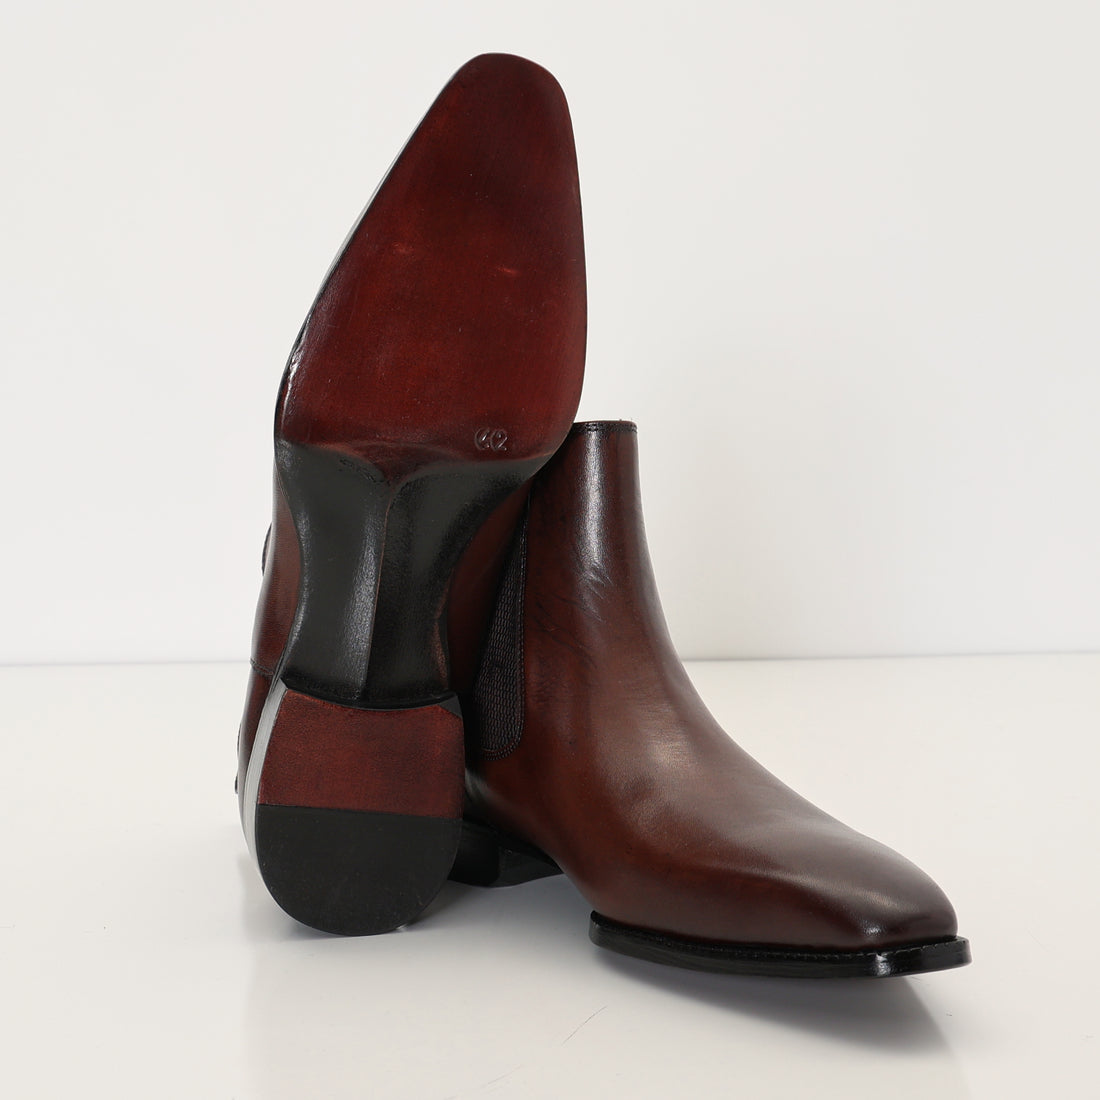 HANDMADE LEATHER CHELSEA BOOT - BROWN